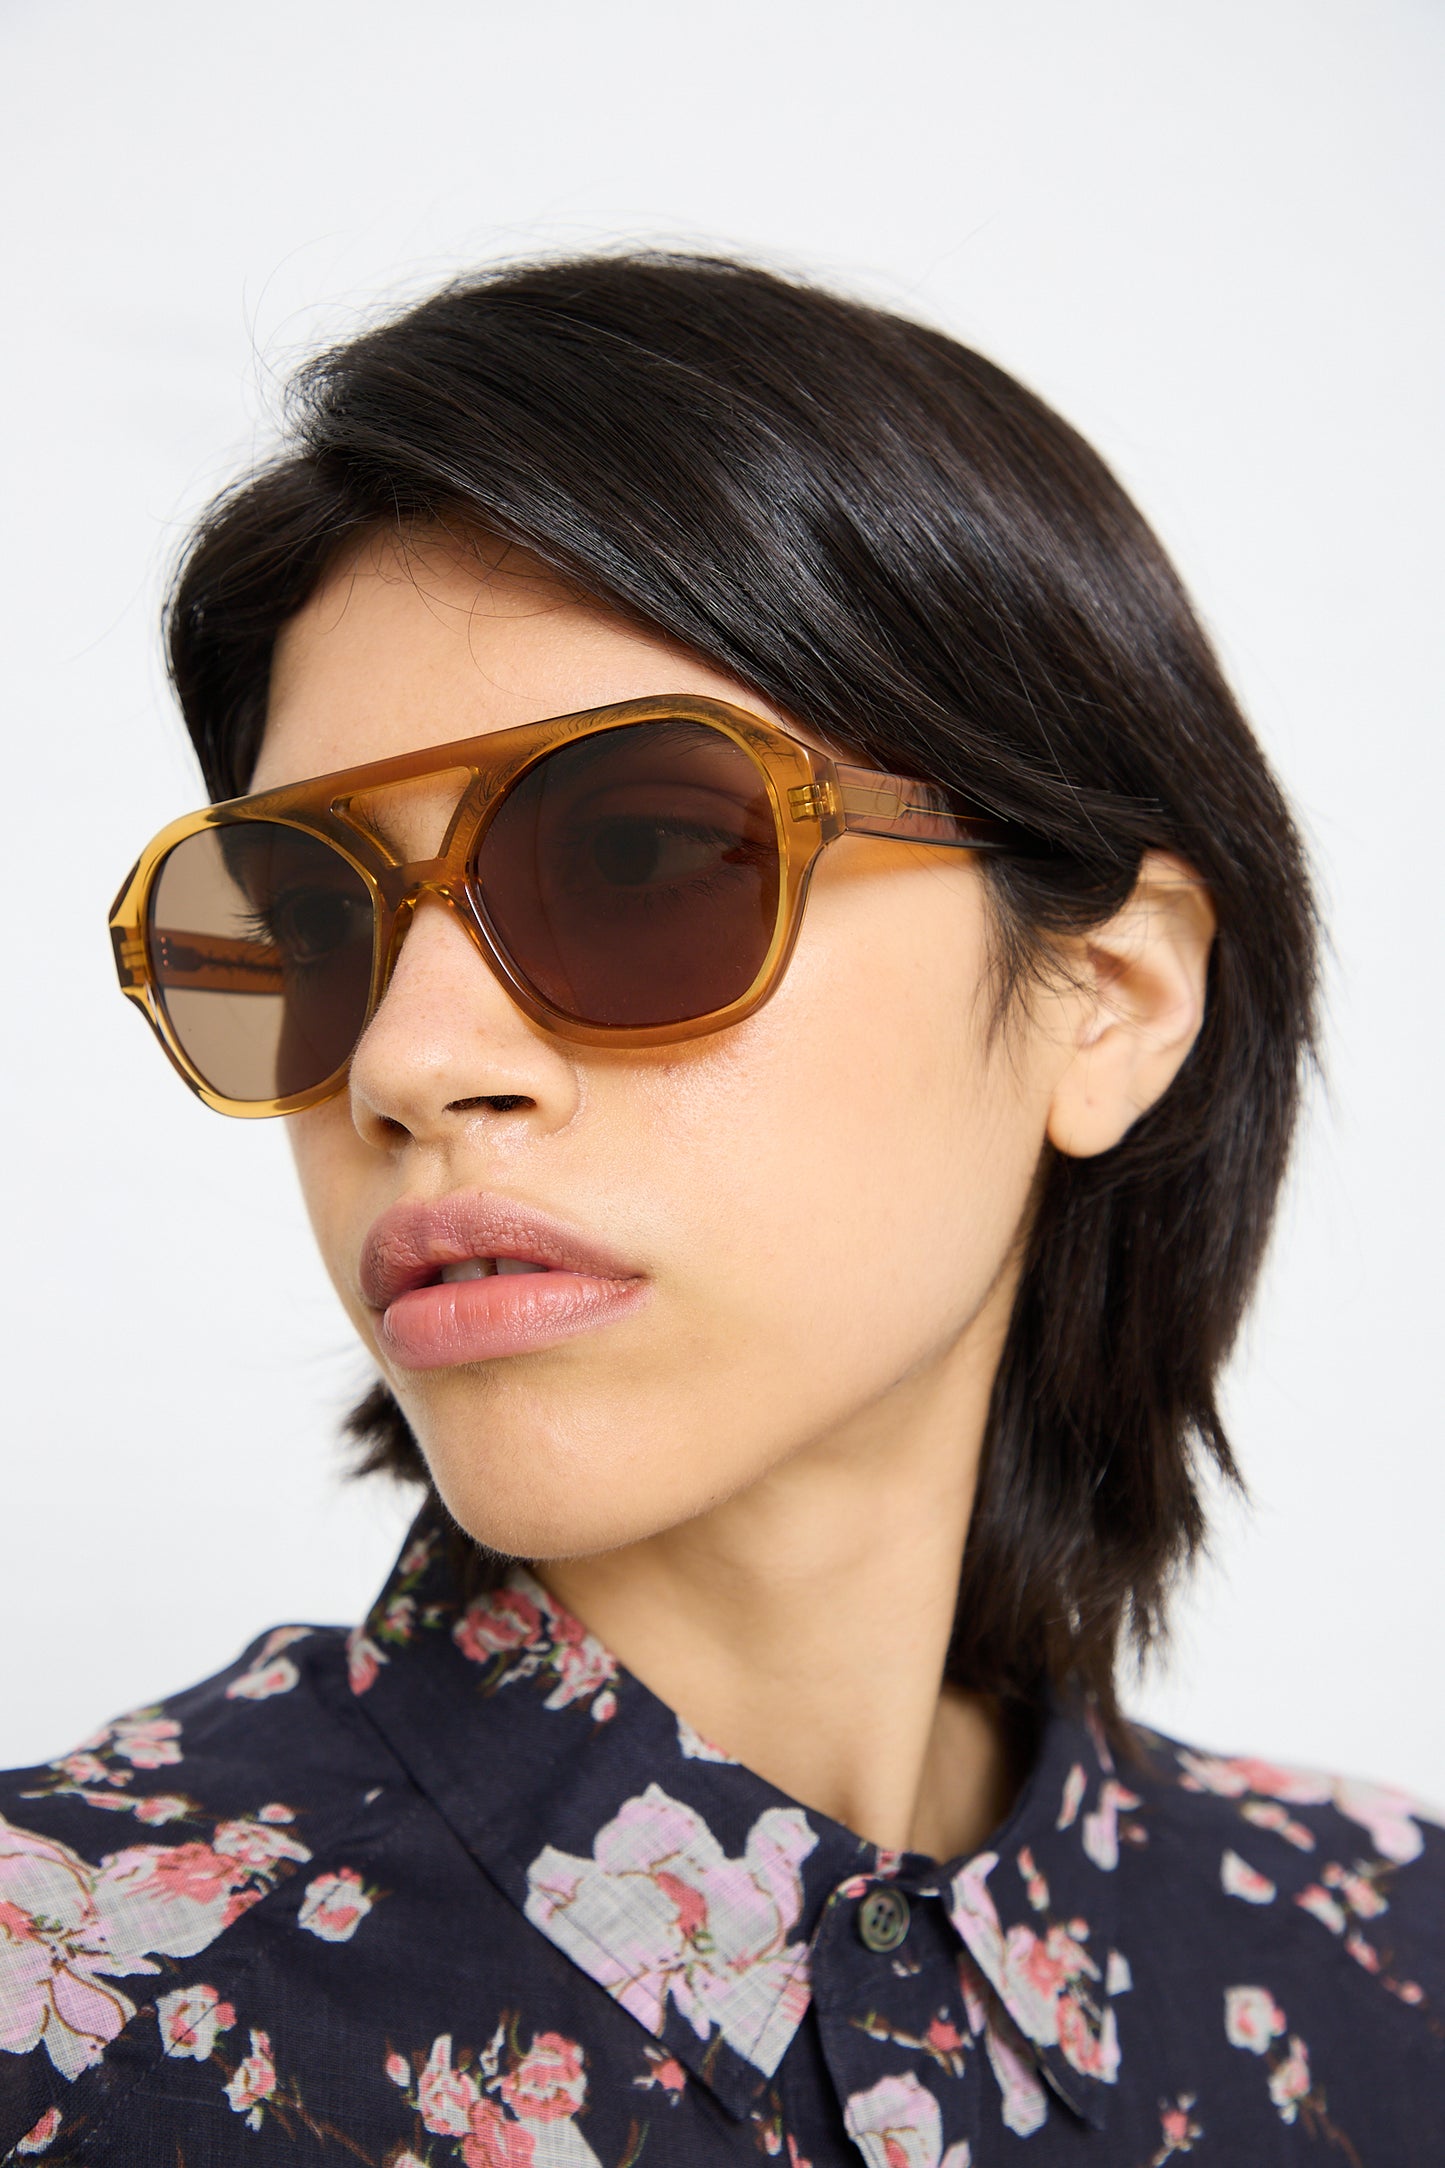 A person with short dark hair wearing large Eva Masaki Chiyo Aviator Sunglasses in Honey and a floral-patterned shirt looks to the side.